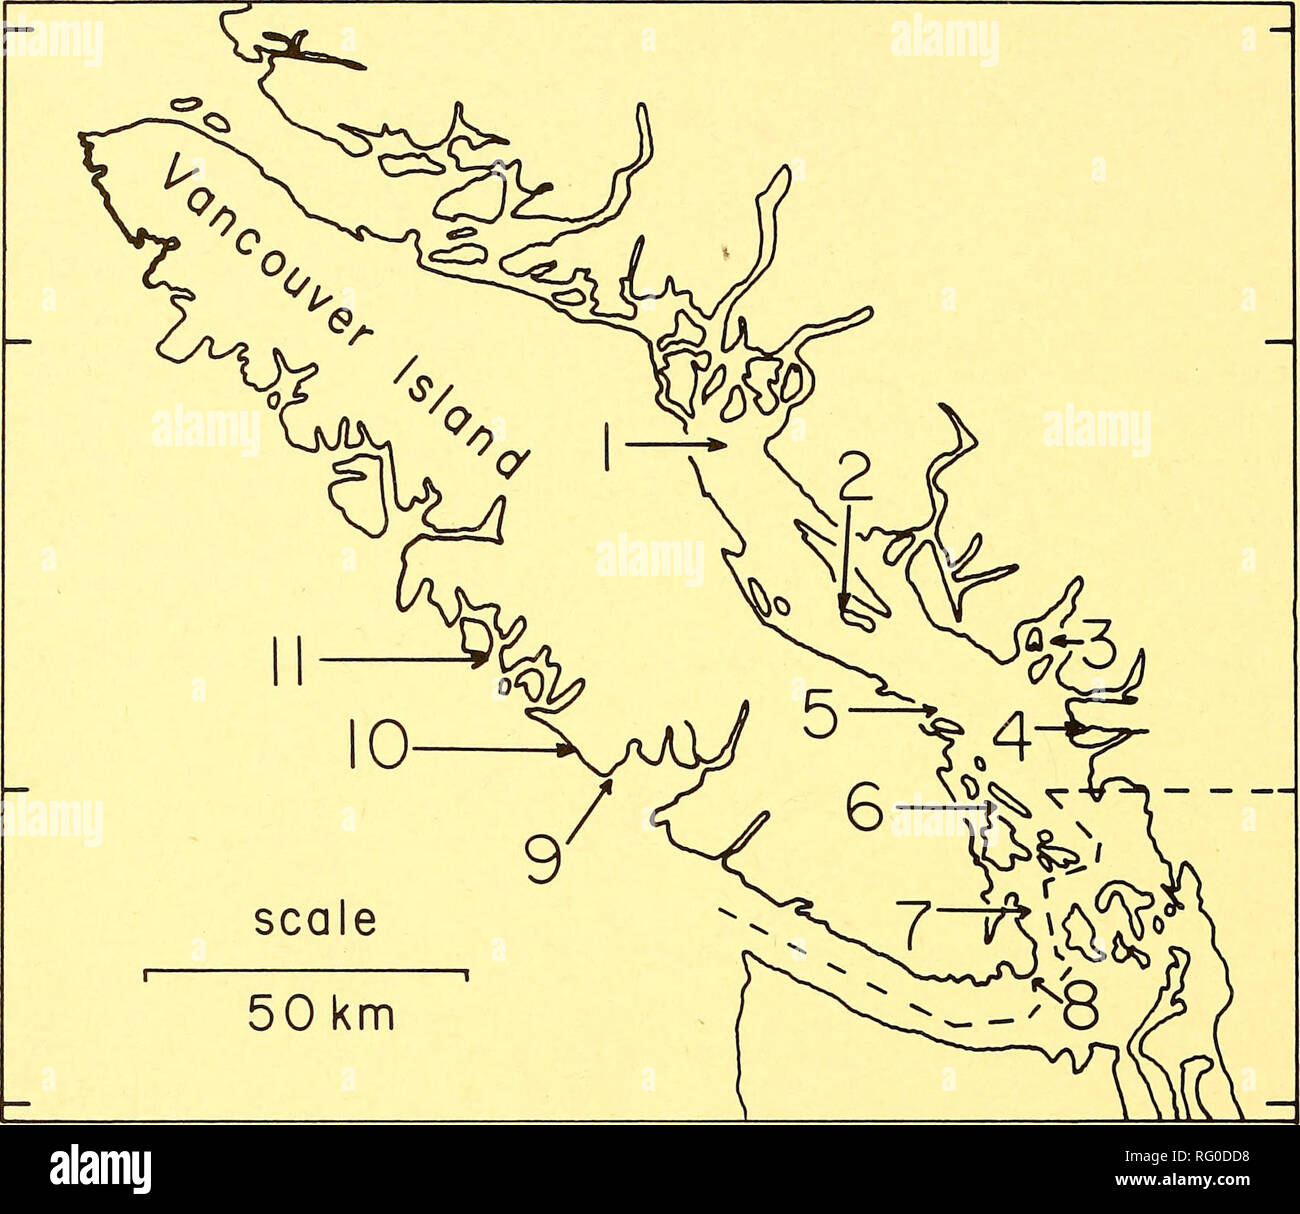 . The Canadian field-naturalist. 316 The Canadian Field-Naturalist Vol. 94. Figure L Location of II Glaucous-winged Gull breeding colonies and banding locations discussed in this study: I — Mitlenatch Island, 2—Lasqueti Island, 3 — Pam, Christie, and Passage Islands (Horseshoe Bay), 4—Westham Island, 5—Snake Island, 6—Ballingal Islet, 7—Mandarte Island, 8—Chain Islets, 9—Ucluelet, 10—Long Beach, 11—South- east Flores Island, all in British Columbia. Mandarte, and Mitlenatch) indicate that the breeding population of Glaucous-winged Gulls has increased about 3.5 times between 1928 and 1974(data  Stock Photo